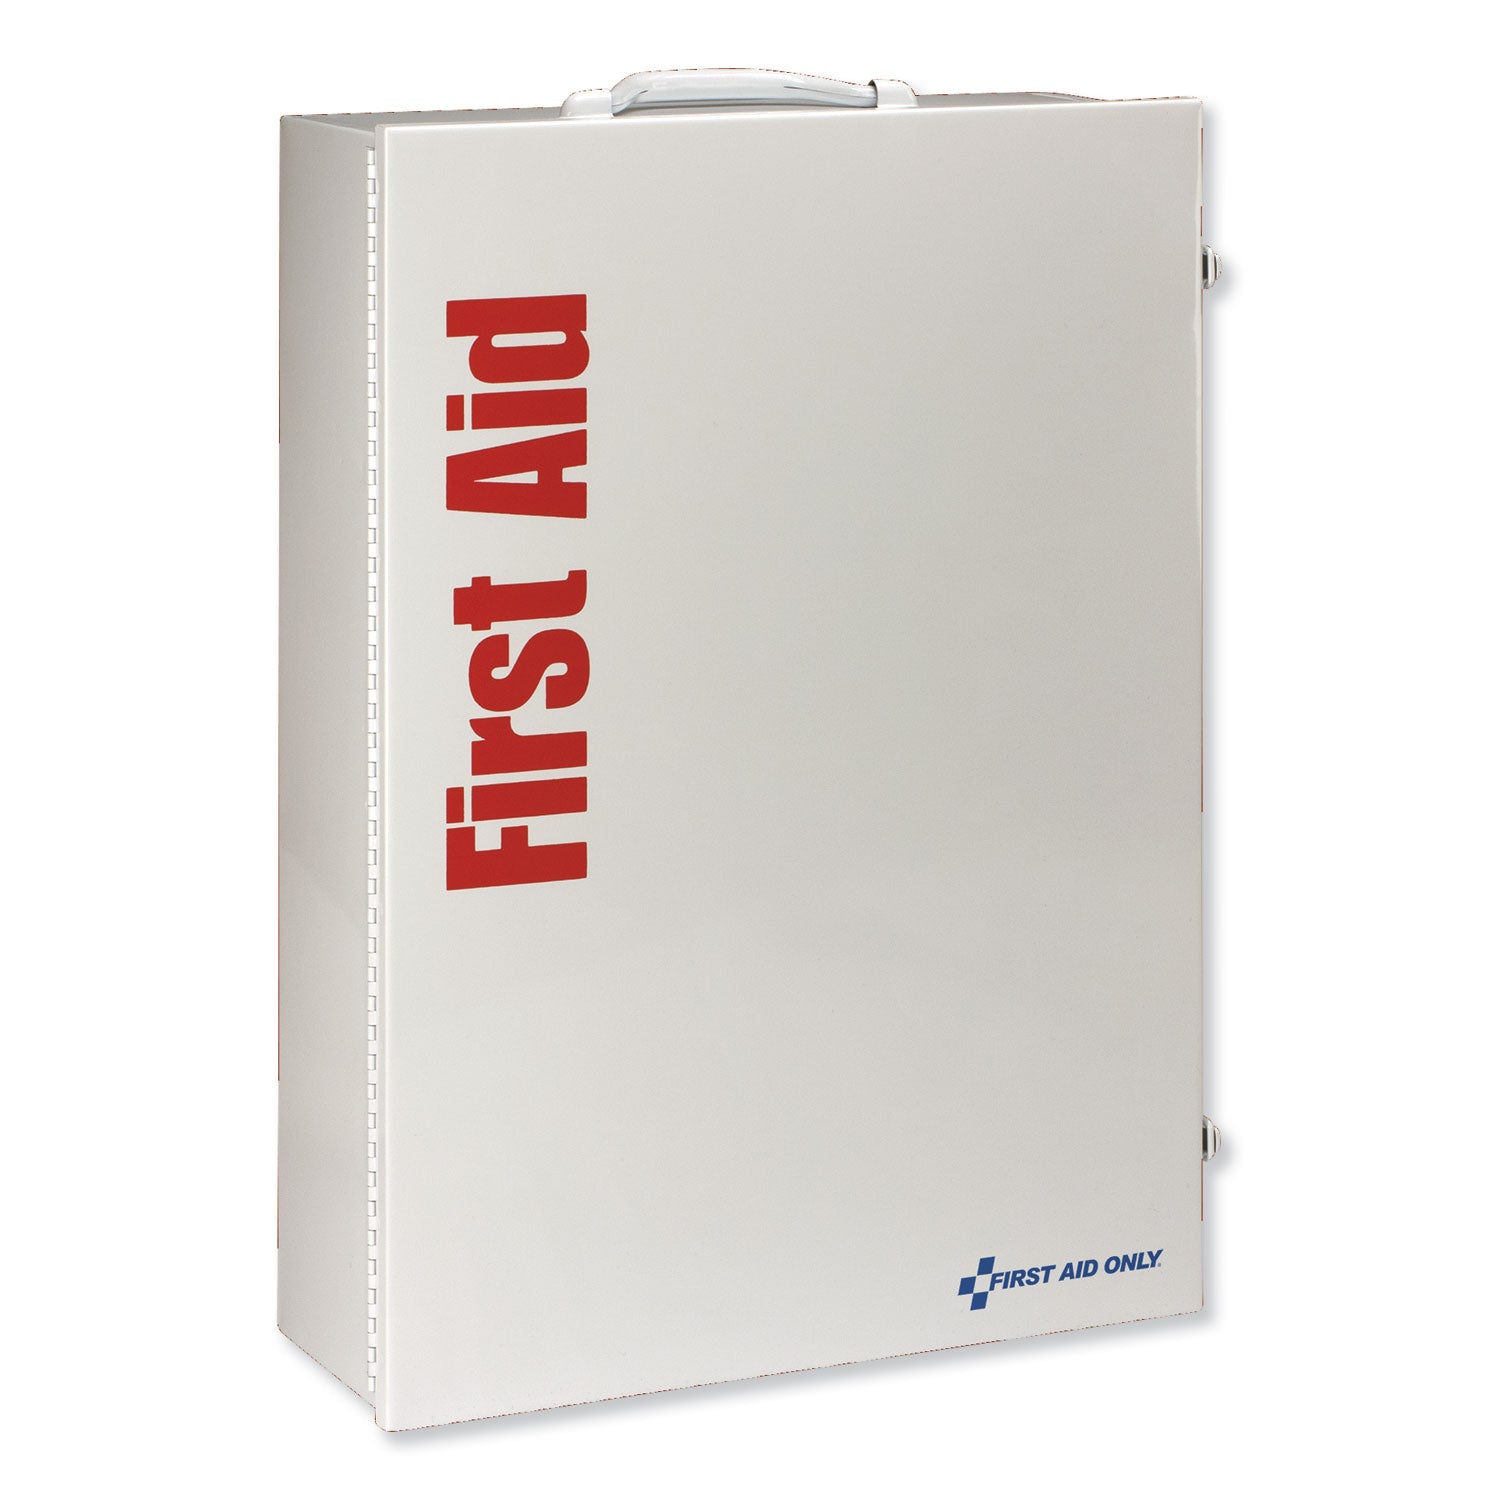 ansi-class-b+-4-shelf-first-aid-station-with-medications-1461-pieces-metal-case_fao90576 - 5